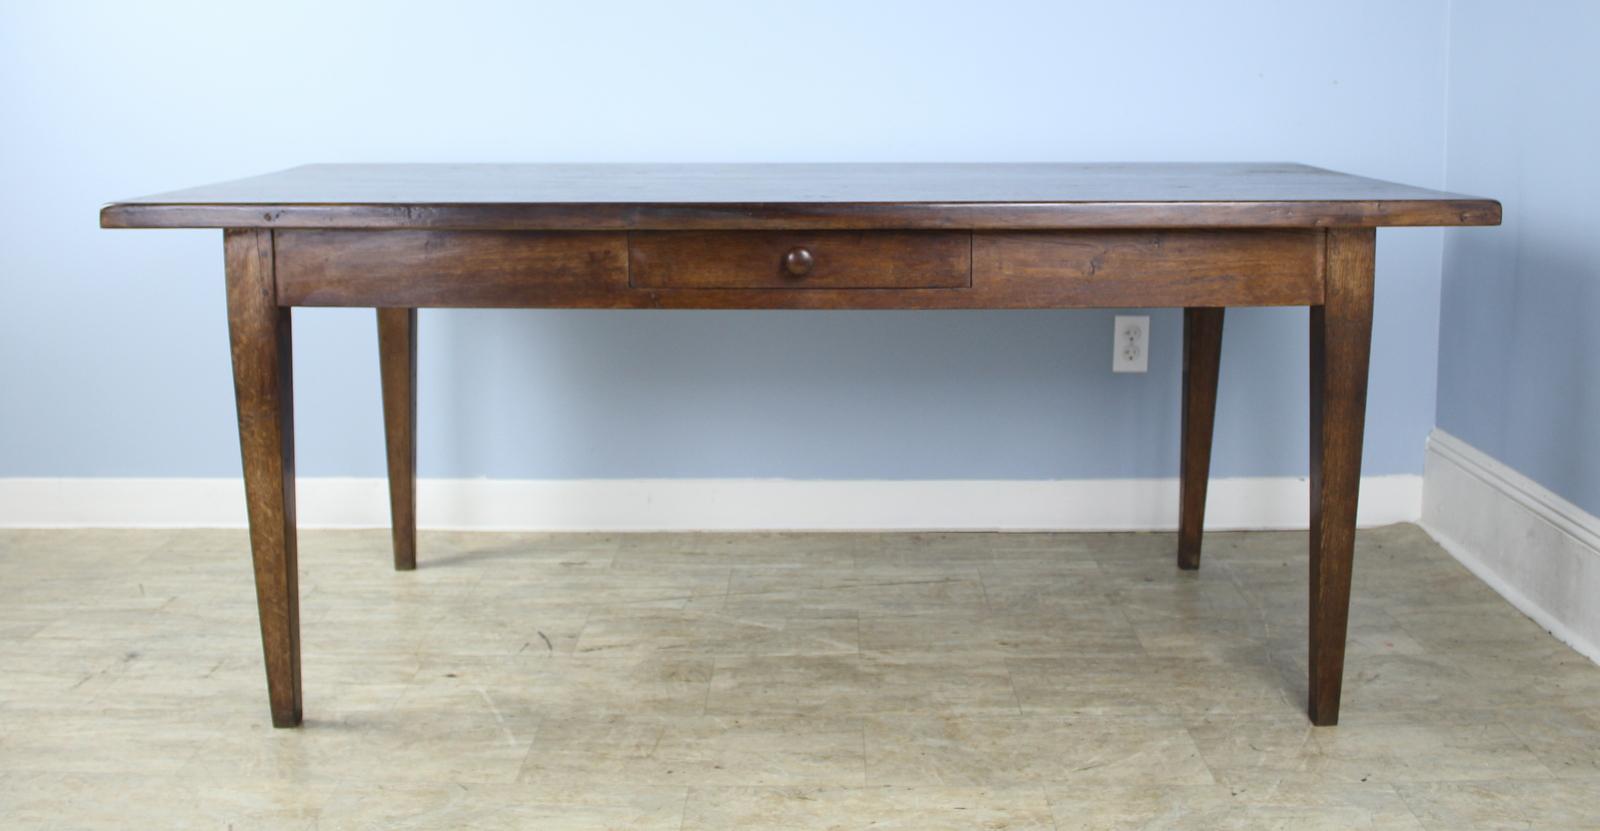 A handsome French dining or farm table with rich color and nice patina. This table has a charming single drawer. Apron height of 24 inches is very good for knees and there are 56.5 inches between the legs on the long side.